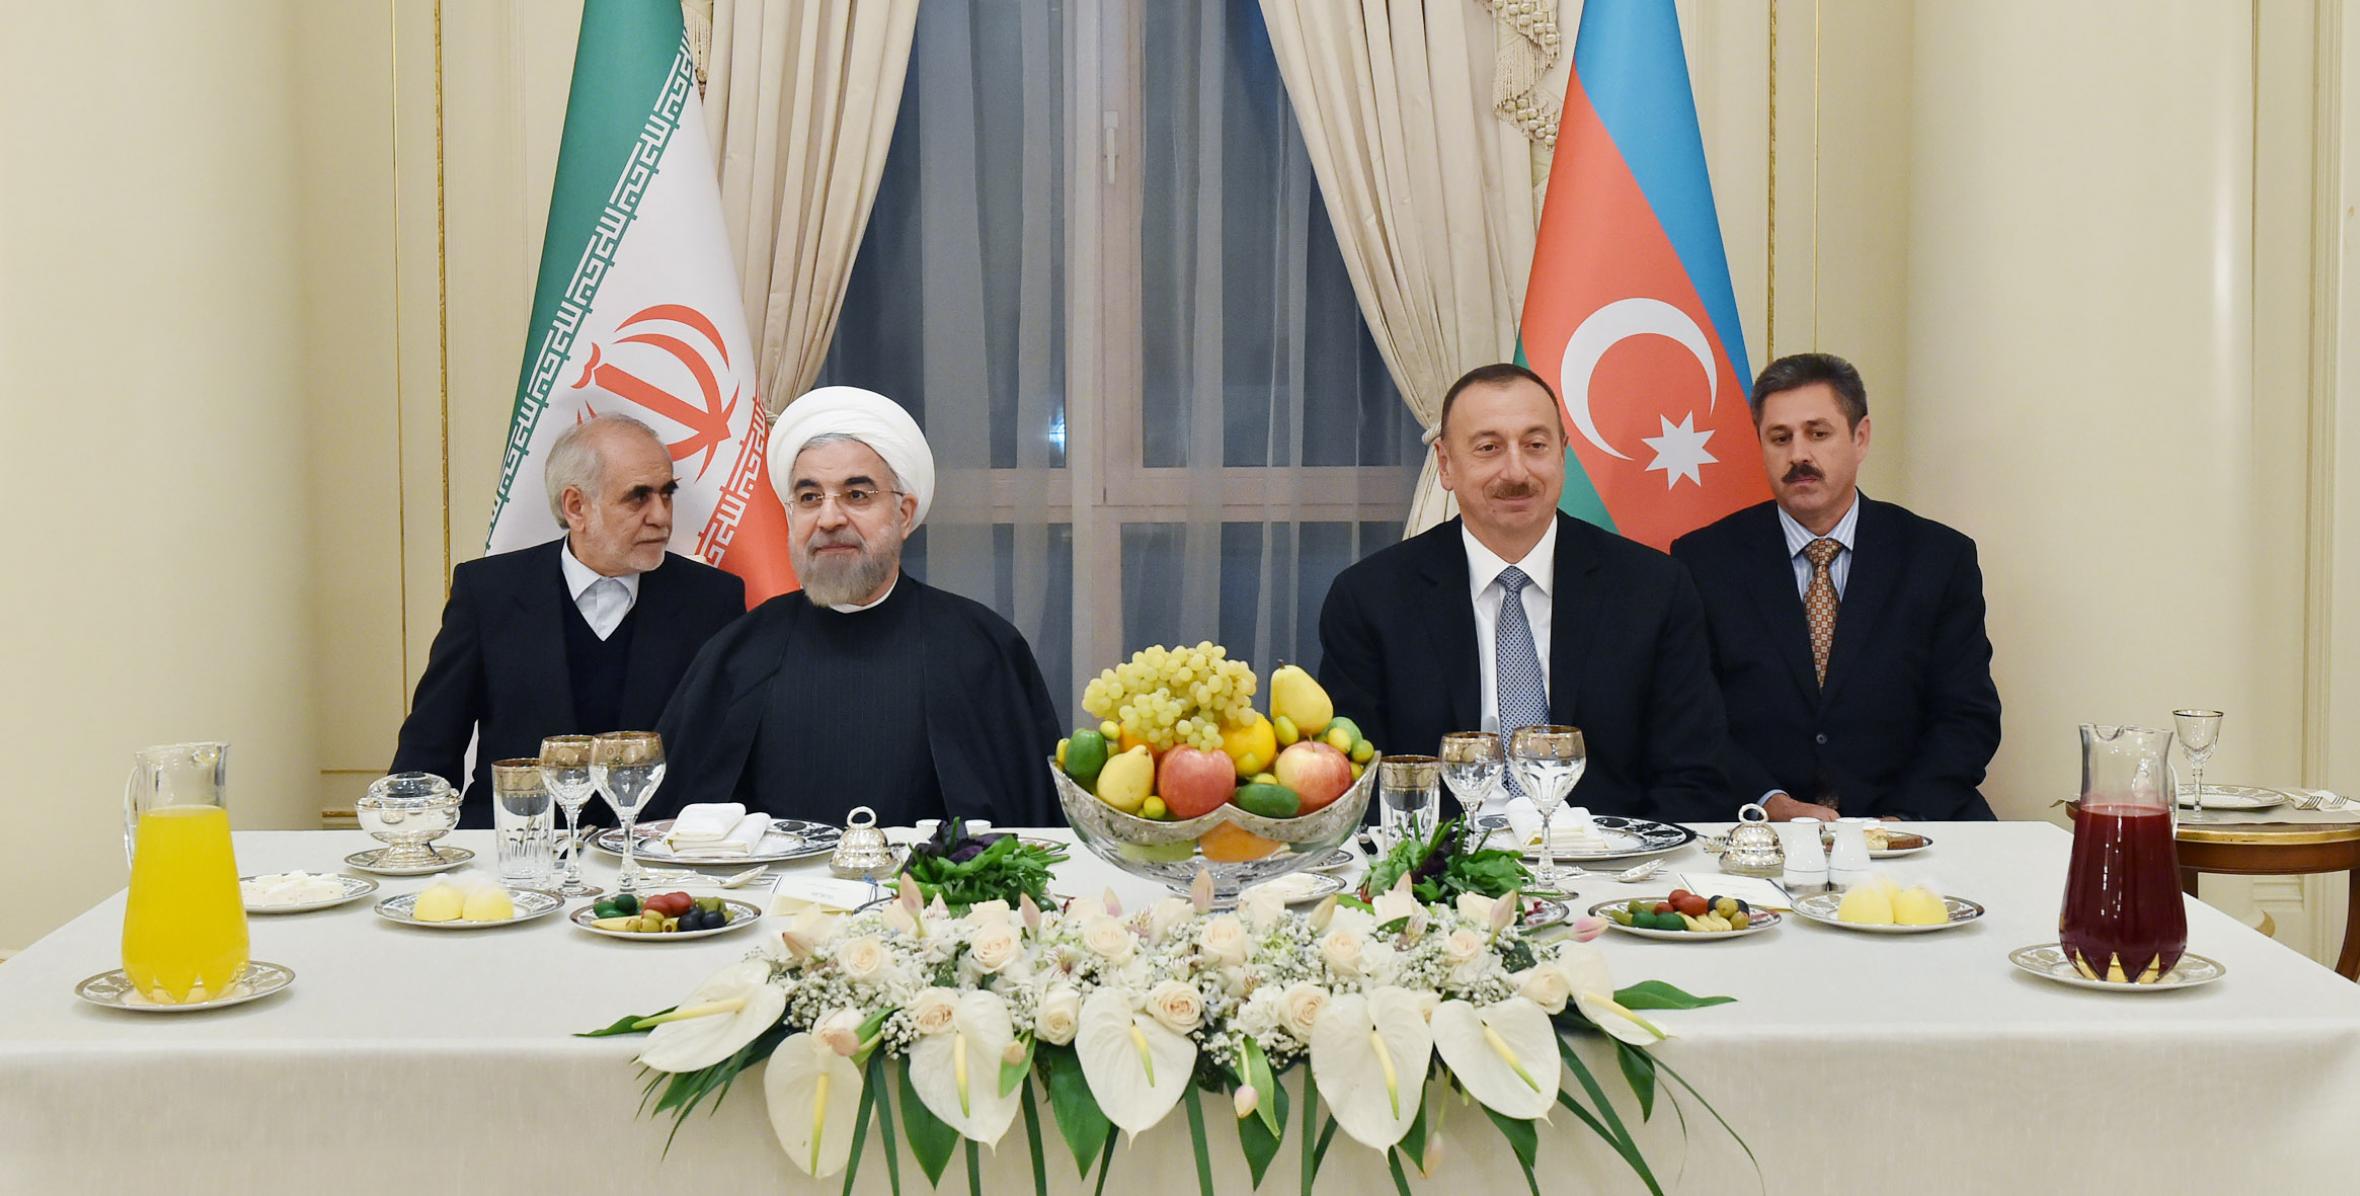 Official dinner reception was hosted on behalf of President Ilham Aliyev in honor of President Hassan Rouhani